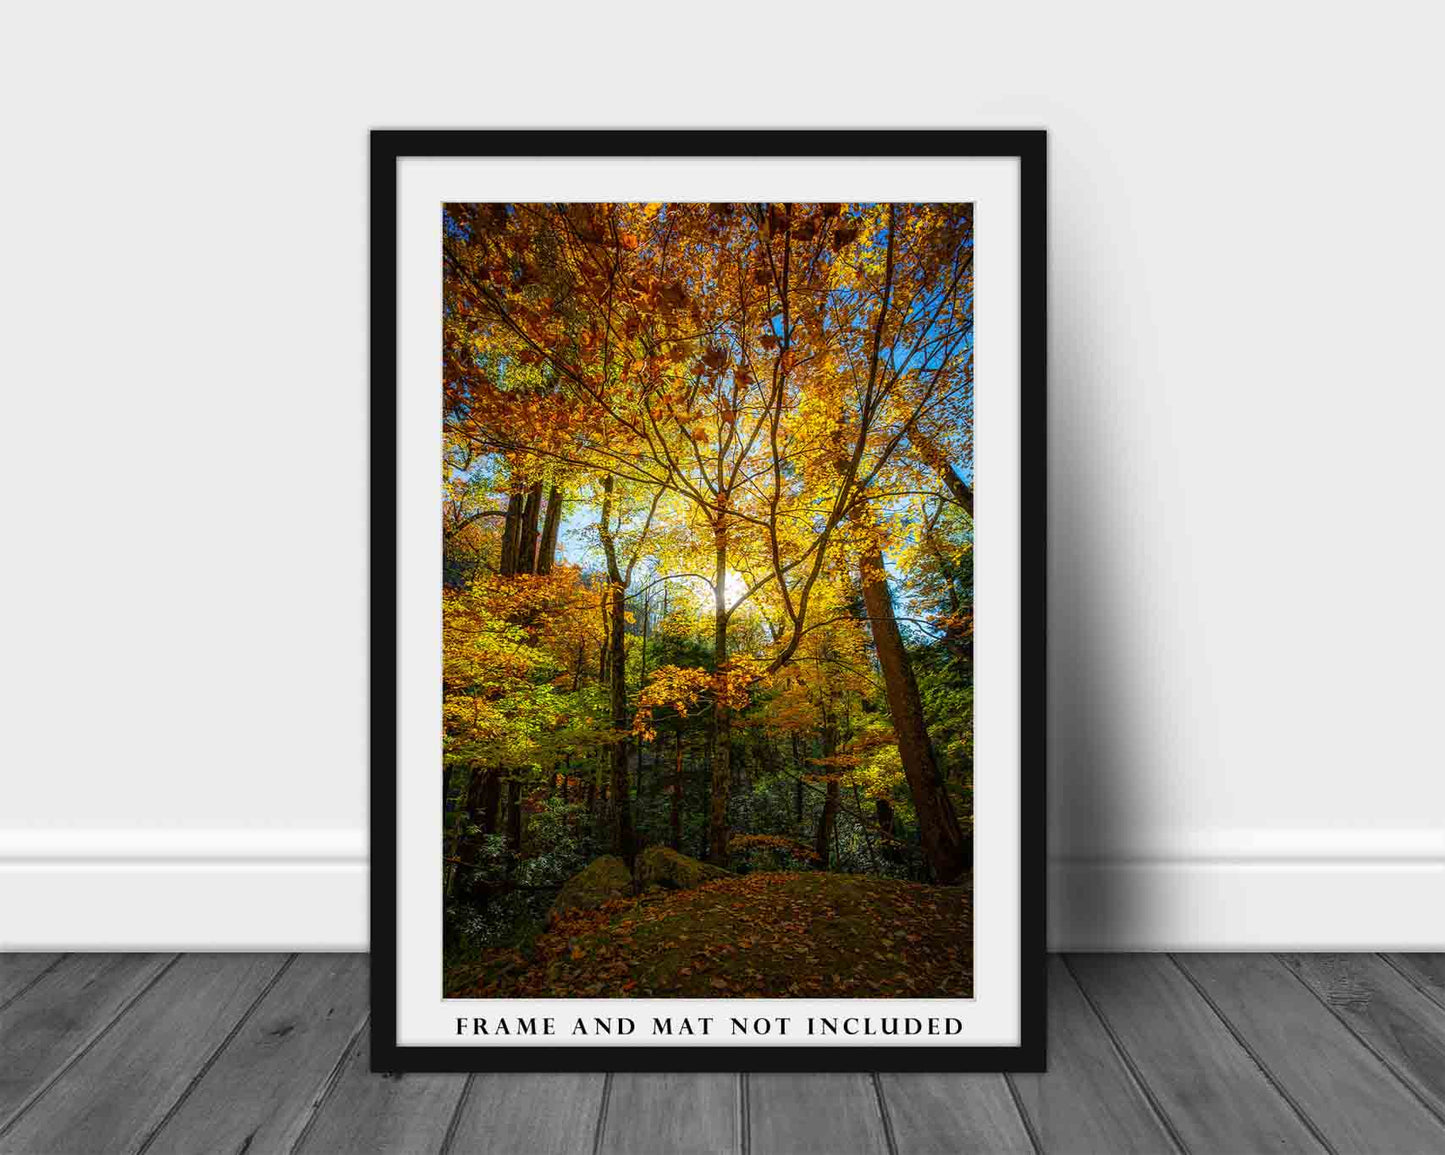 Autumn Photography Print - Picture of Sunlight Illuminating Trees with Fall Color in Great Smoky Mountains Tennessee - Forest Wall Art Decor